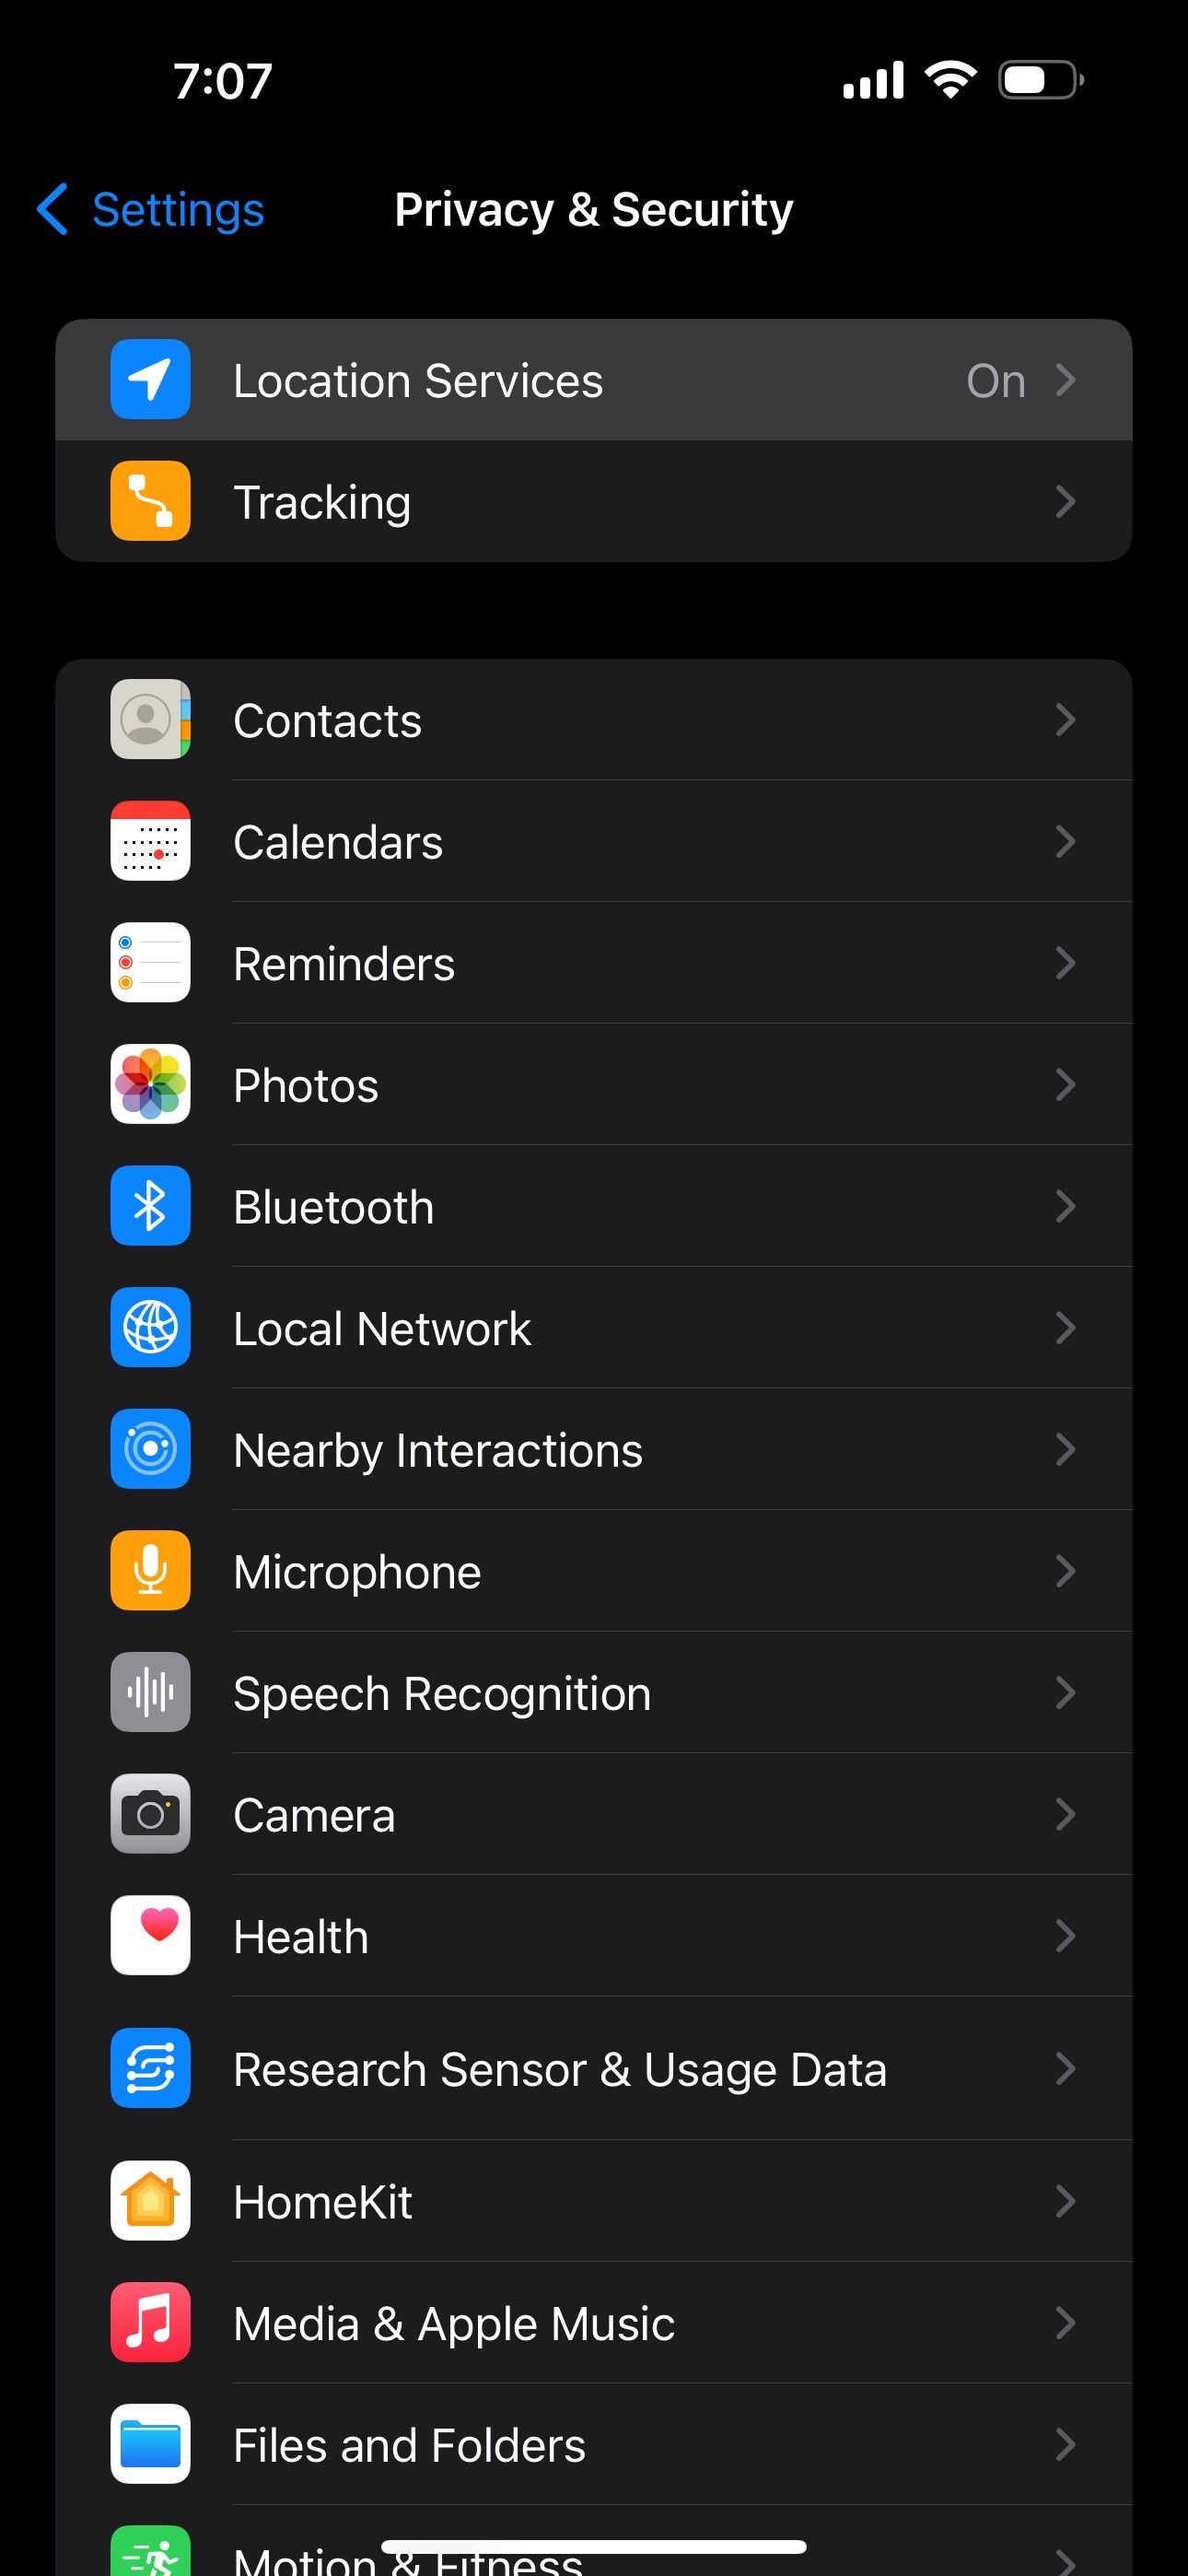 Privacy & Security screen in iPhone settings including Location Services